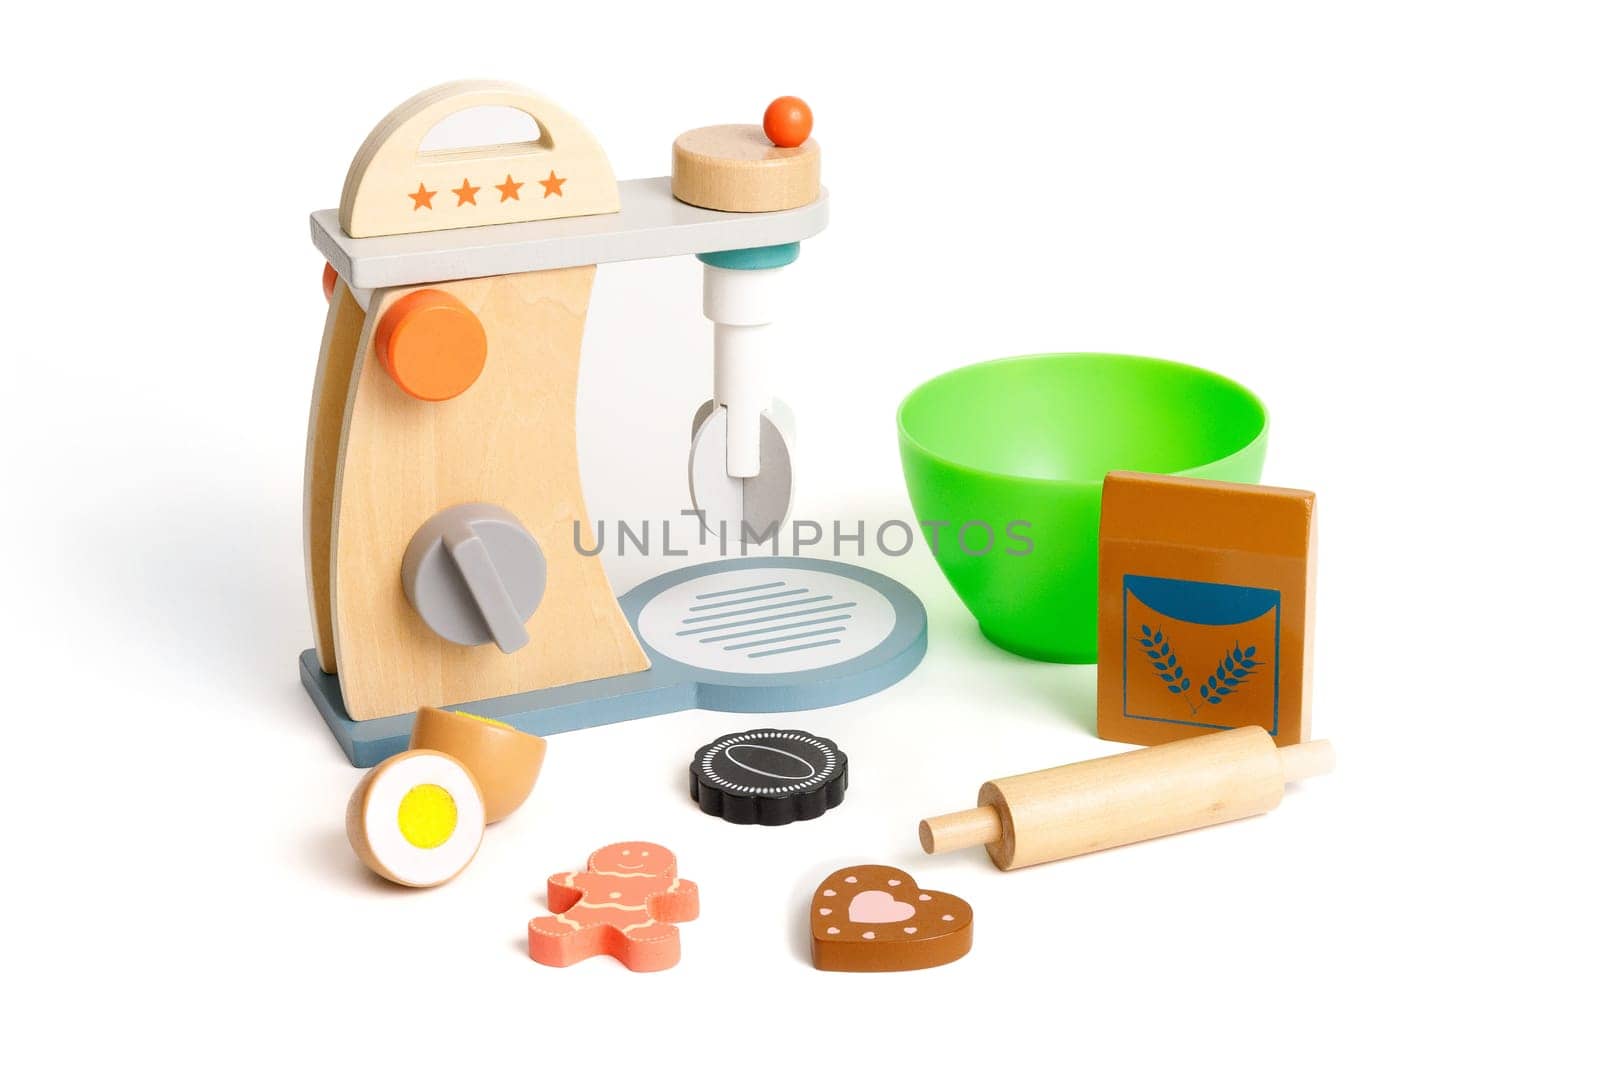 Toy kitchen plastic set for baking cookies, isolated on white background by Rom4ek